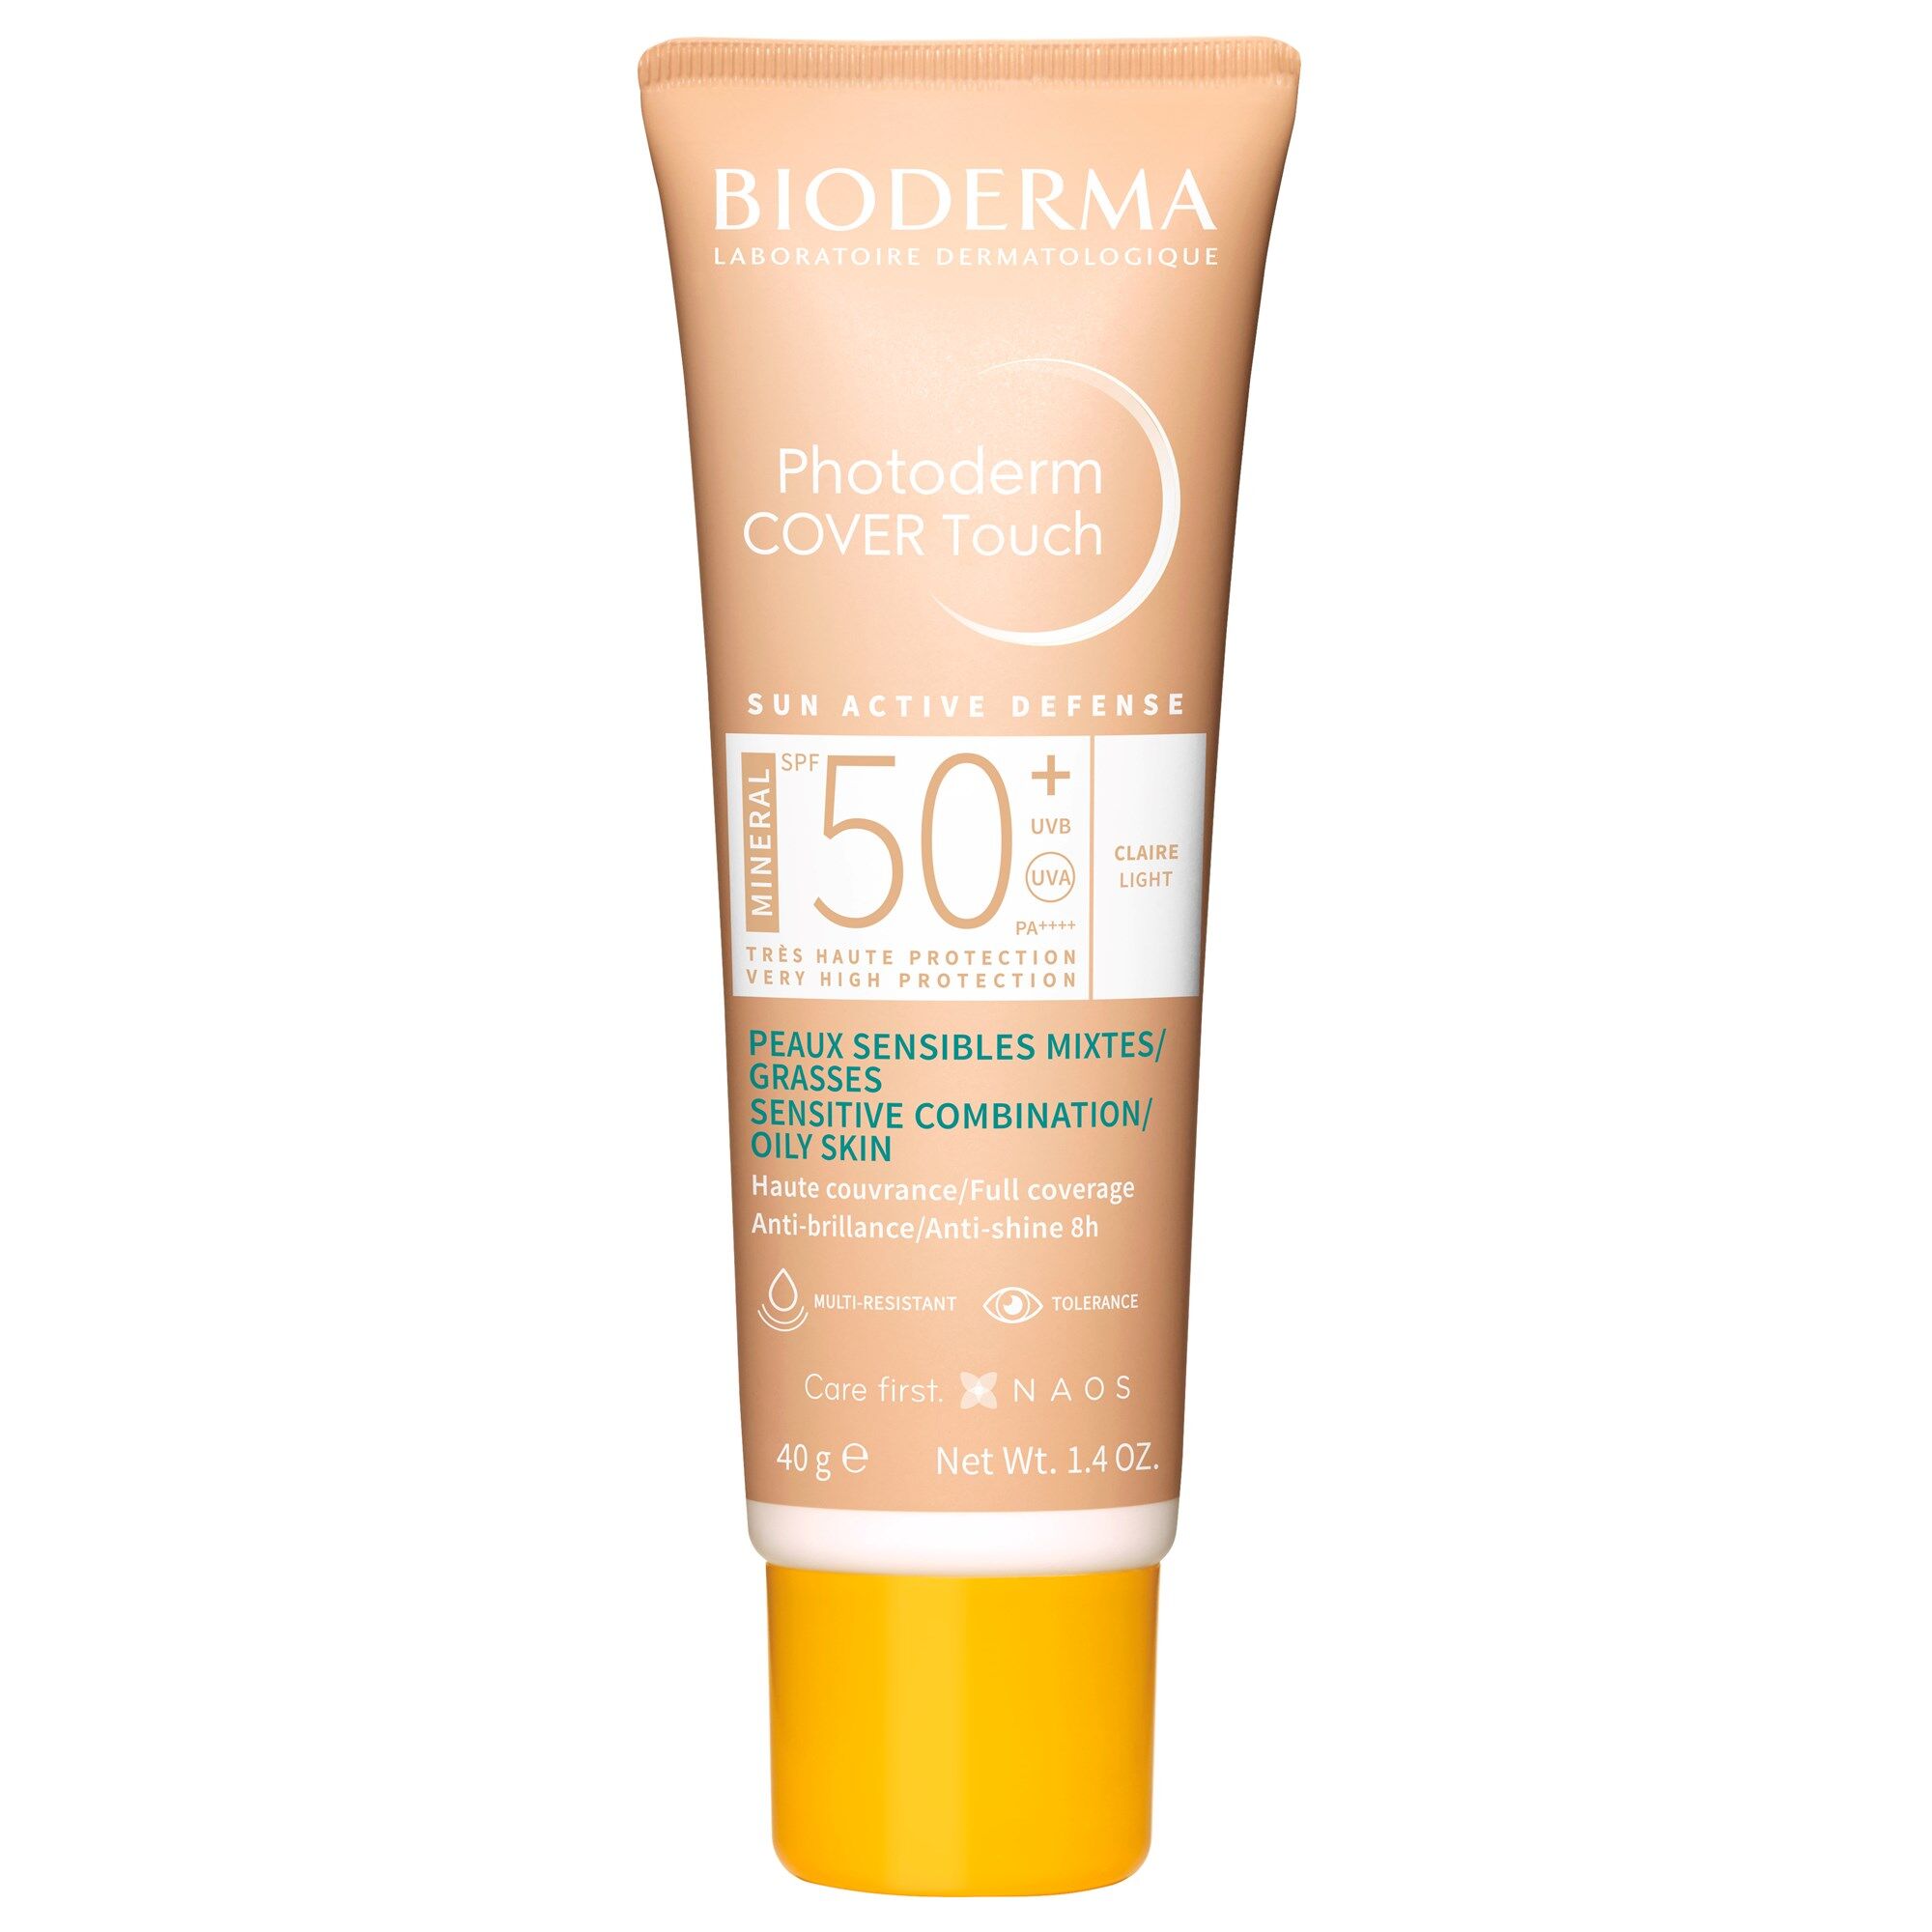 Bioderma Protector solar Photoderm Cover Touch SPF50+ Tinte Mineral 40g Mineral Light SPF50